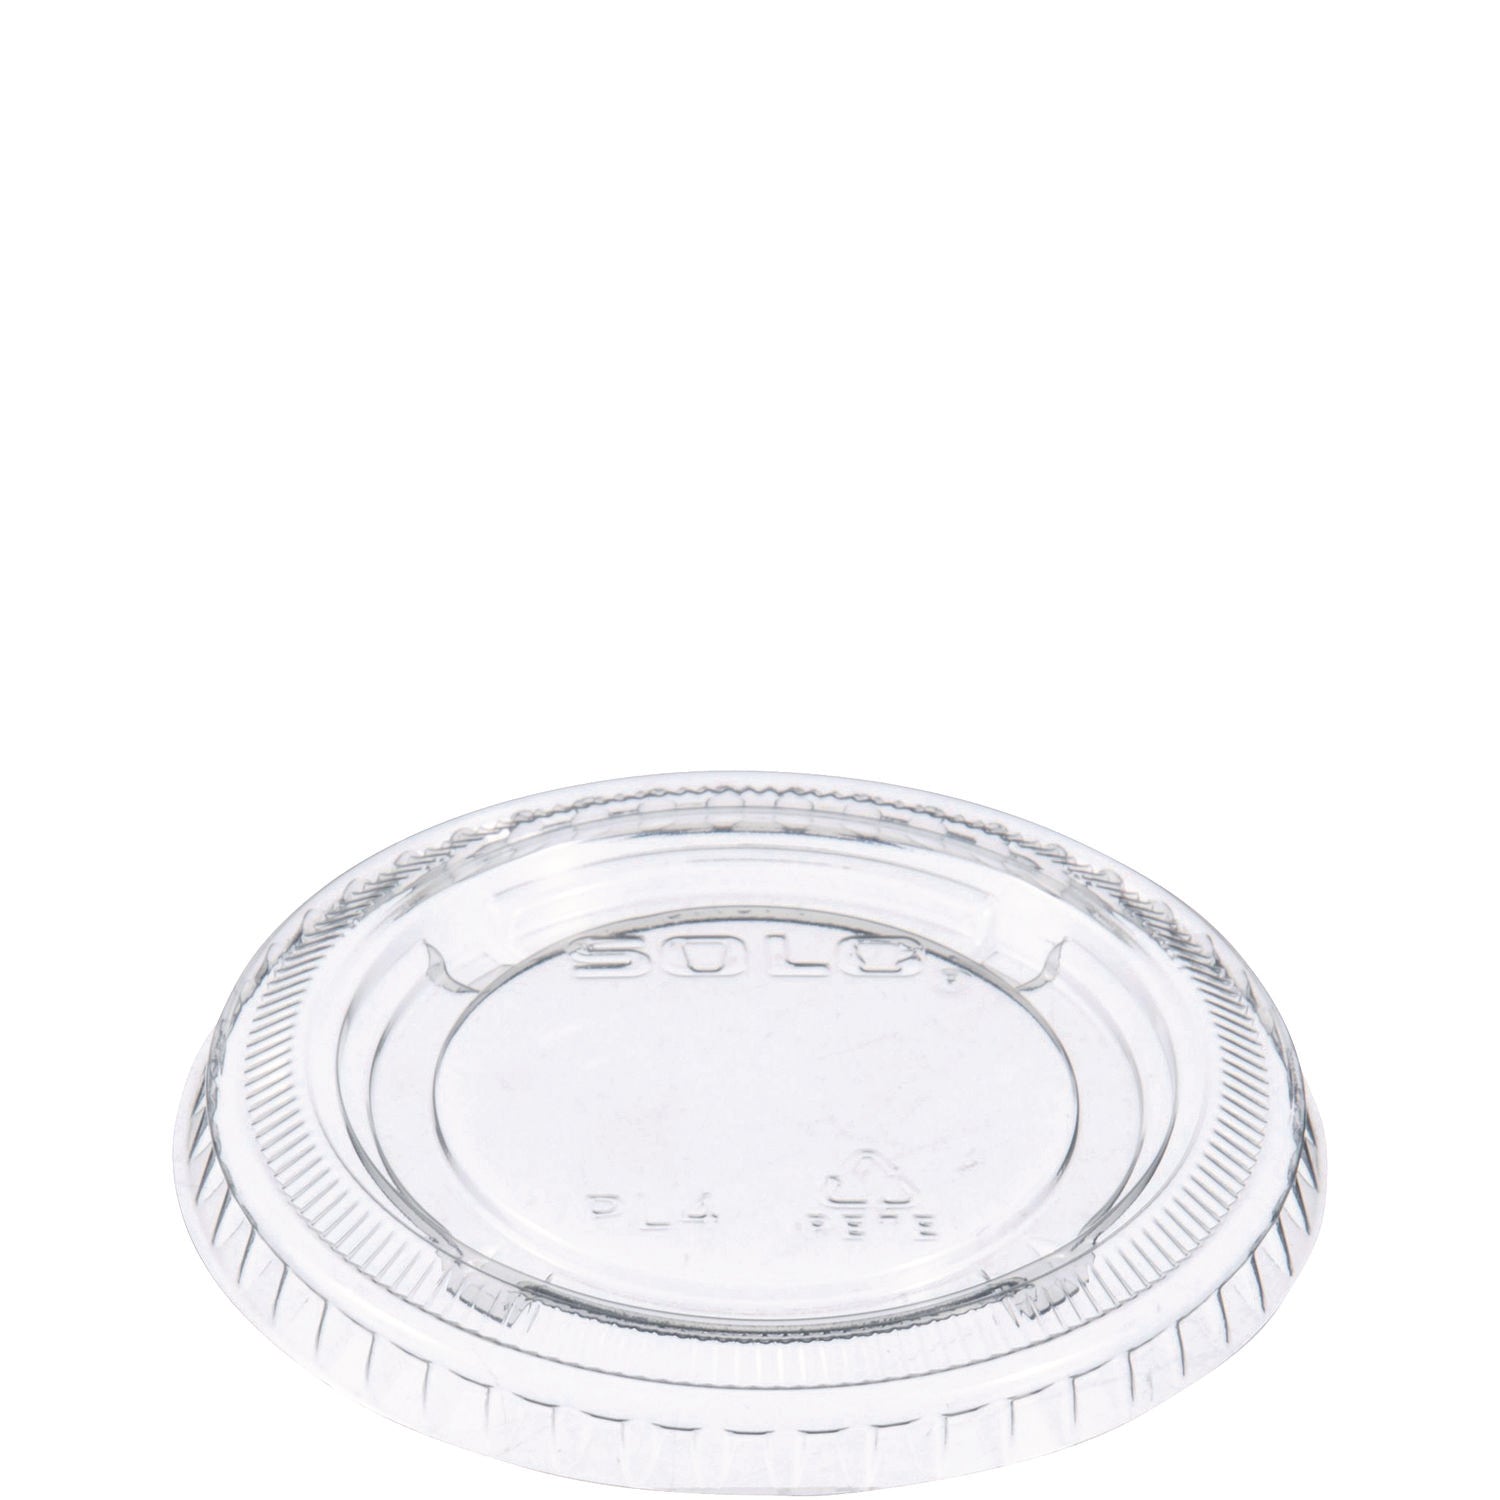 Portion/Souffle Cup Lids, Fits 3.25 oz to 9 oz Cups, Clear, 125/Pack, 20 Packs/Carton - 